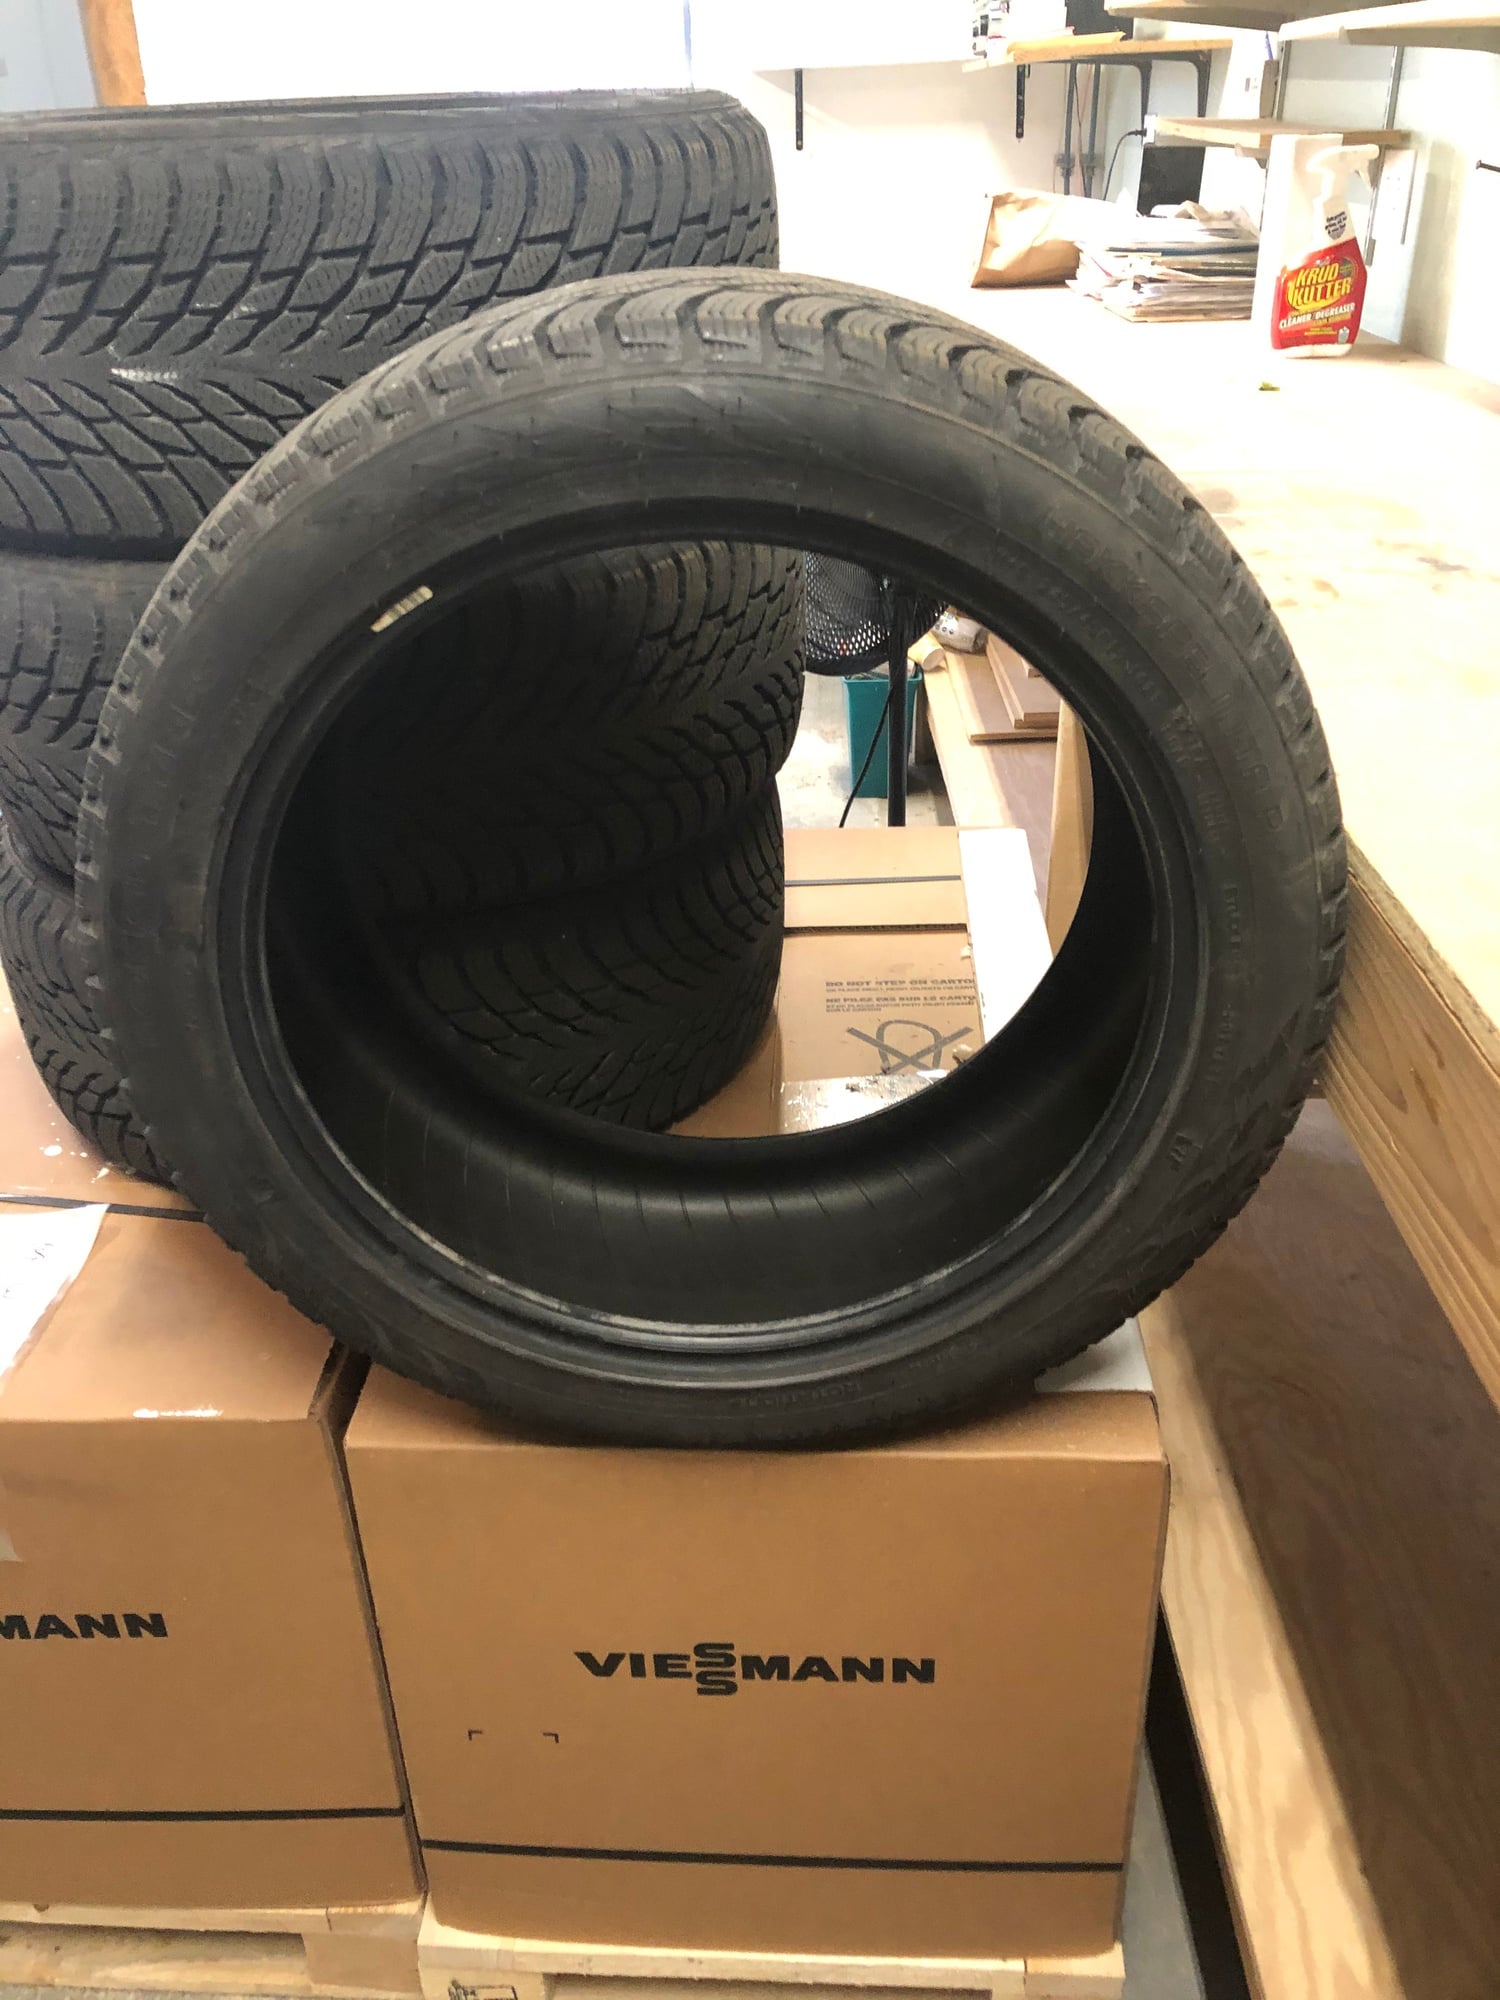 Wheels and Tires/Axles - Four 19” TSW Clypse wheels S550 - Used - 2014 to 2022 Mercedes-Benz S550 - Portland, ME 04103, United States